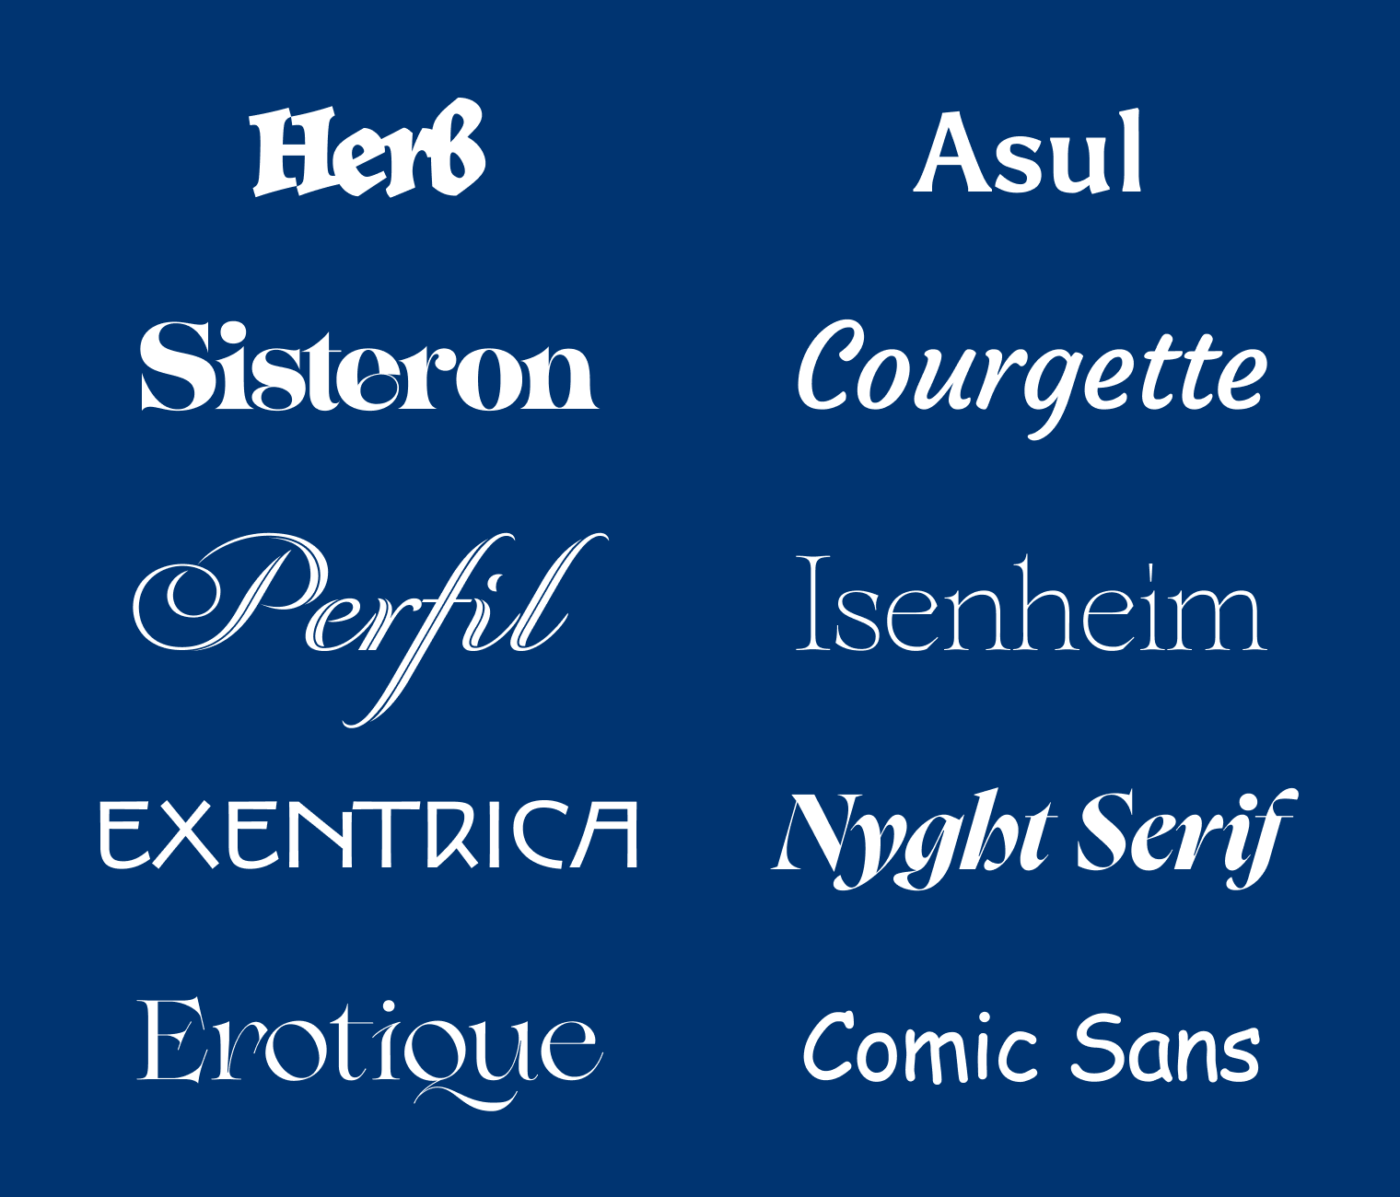 Herb, Asul, Sisteron, Courgette, Perfil, Isenheim, Exentrica, Nyght Serif, Erotique y… Comic Sans